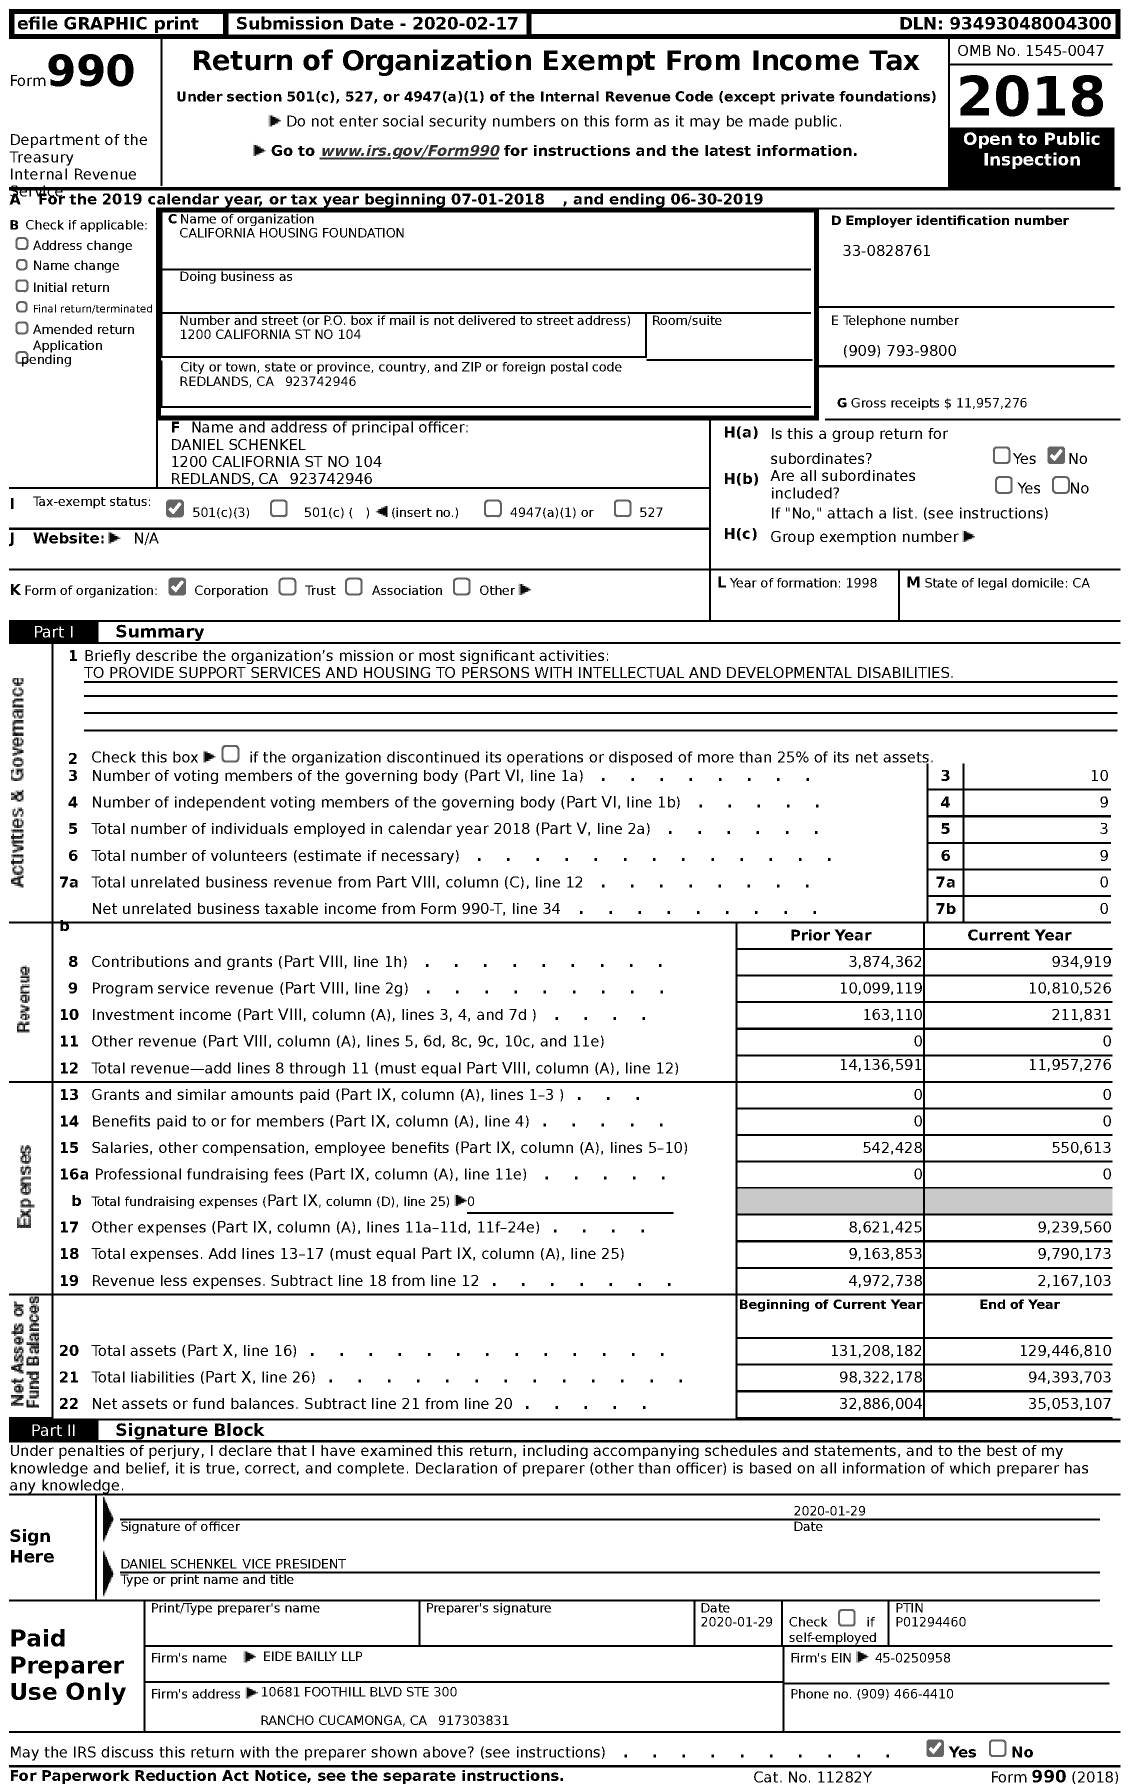 Image of first page of 2018 Form 990 for California Housing Foundation (CHF)